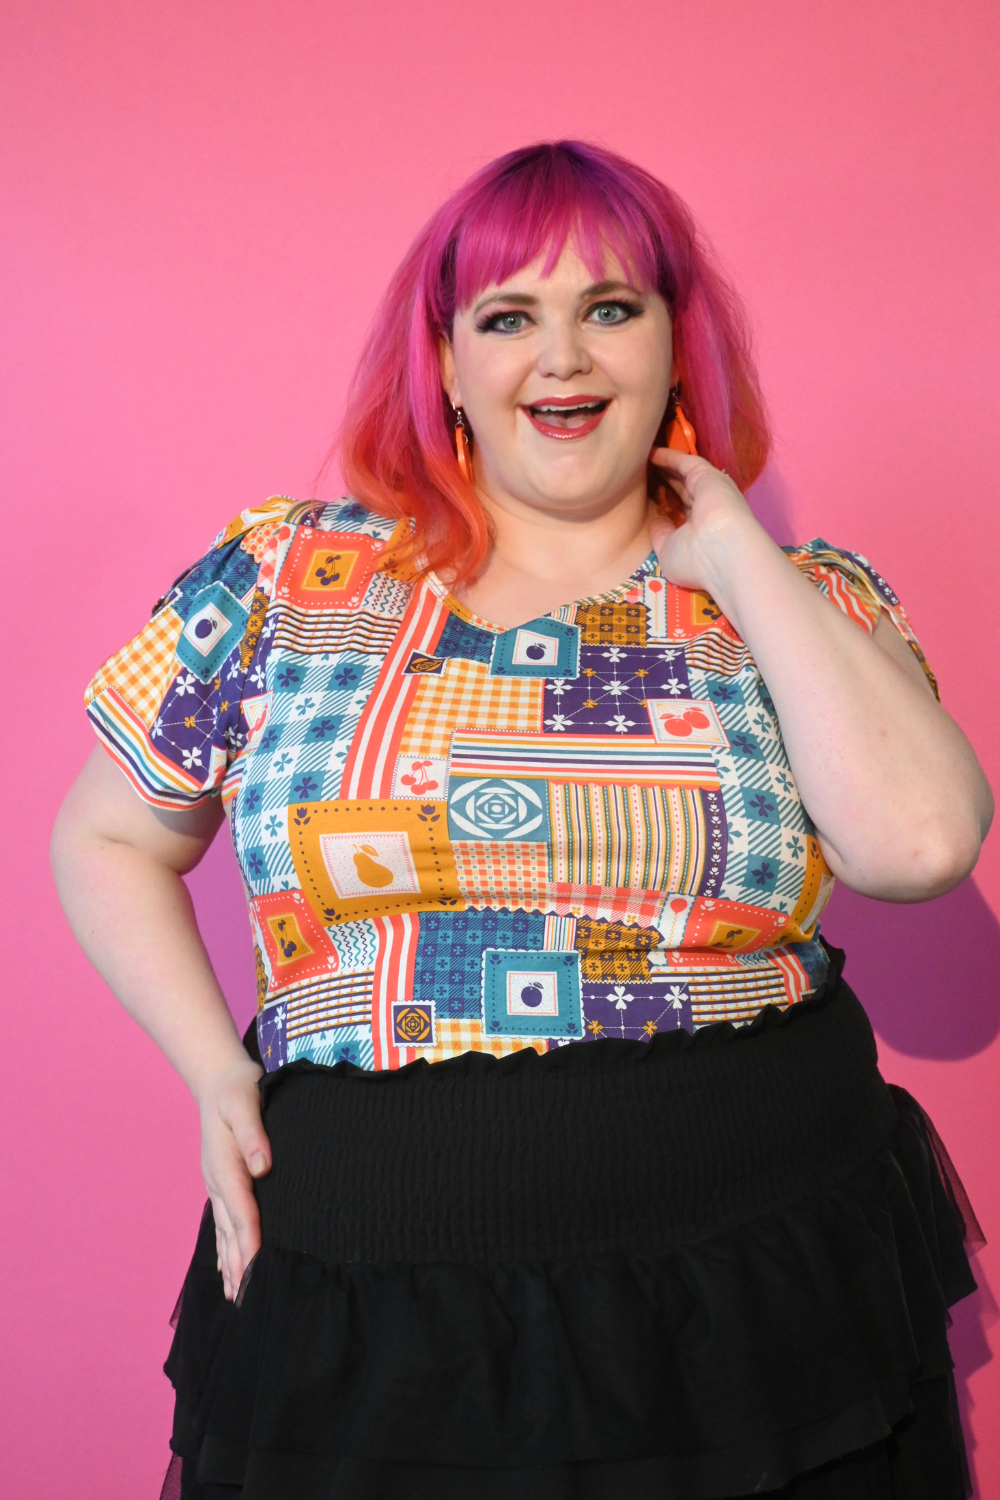 Pink-haired model in shirt printed with patchwork and fruit print